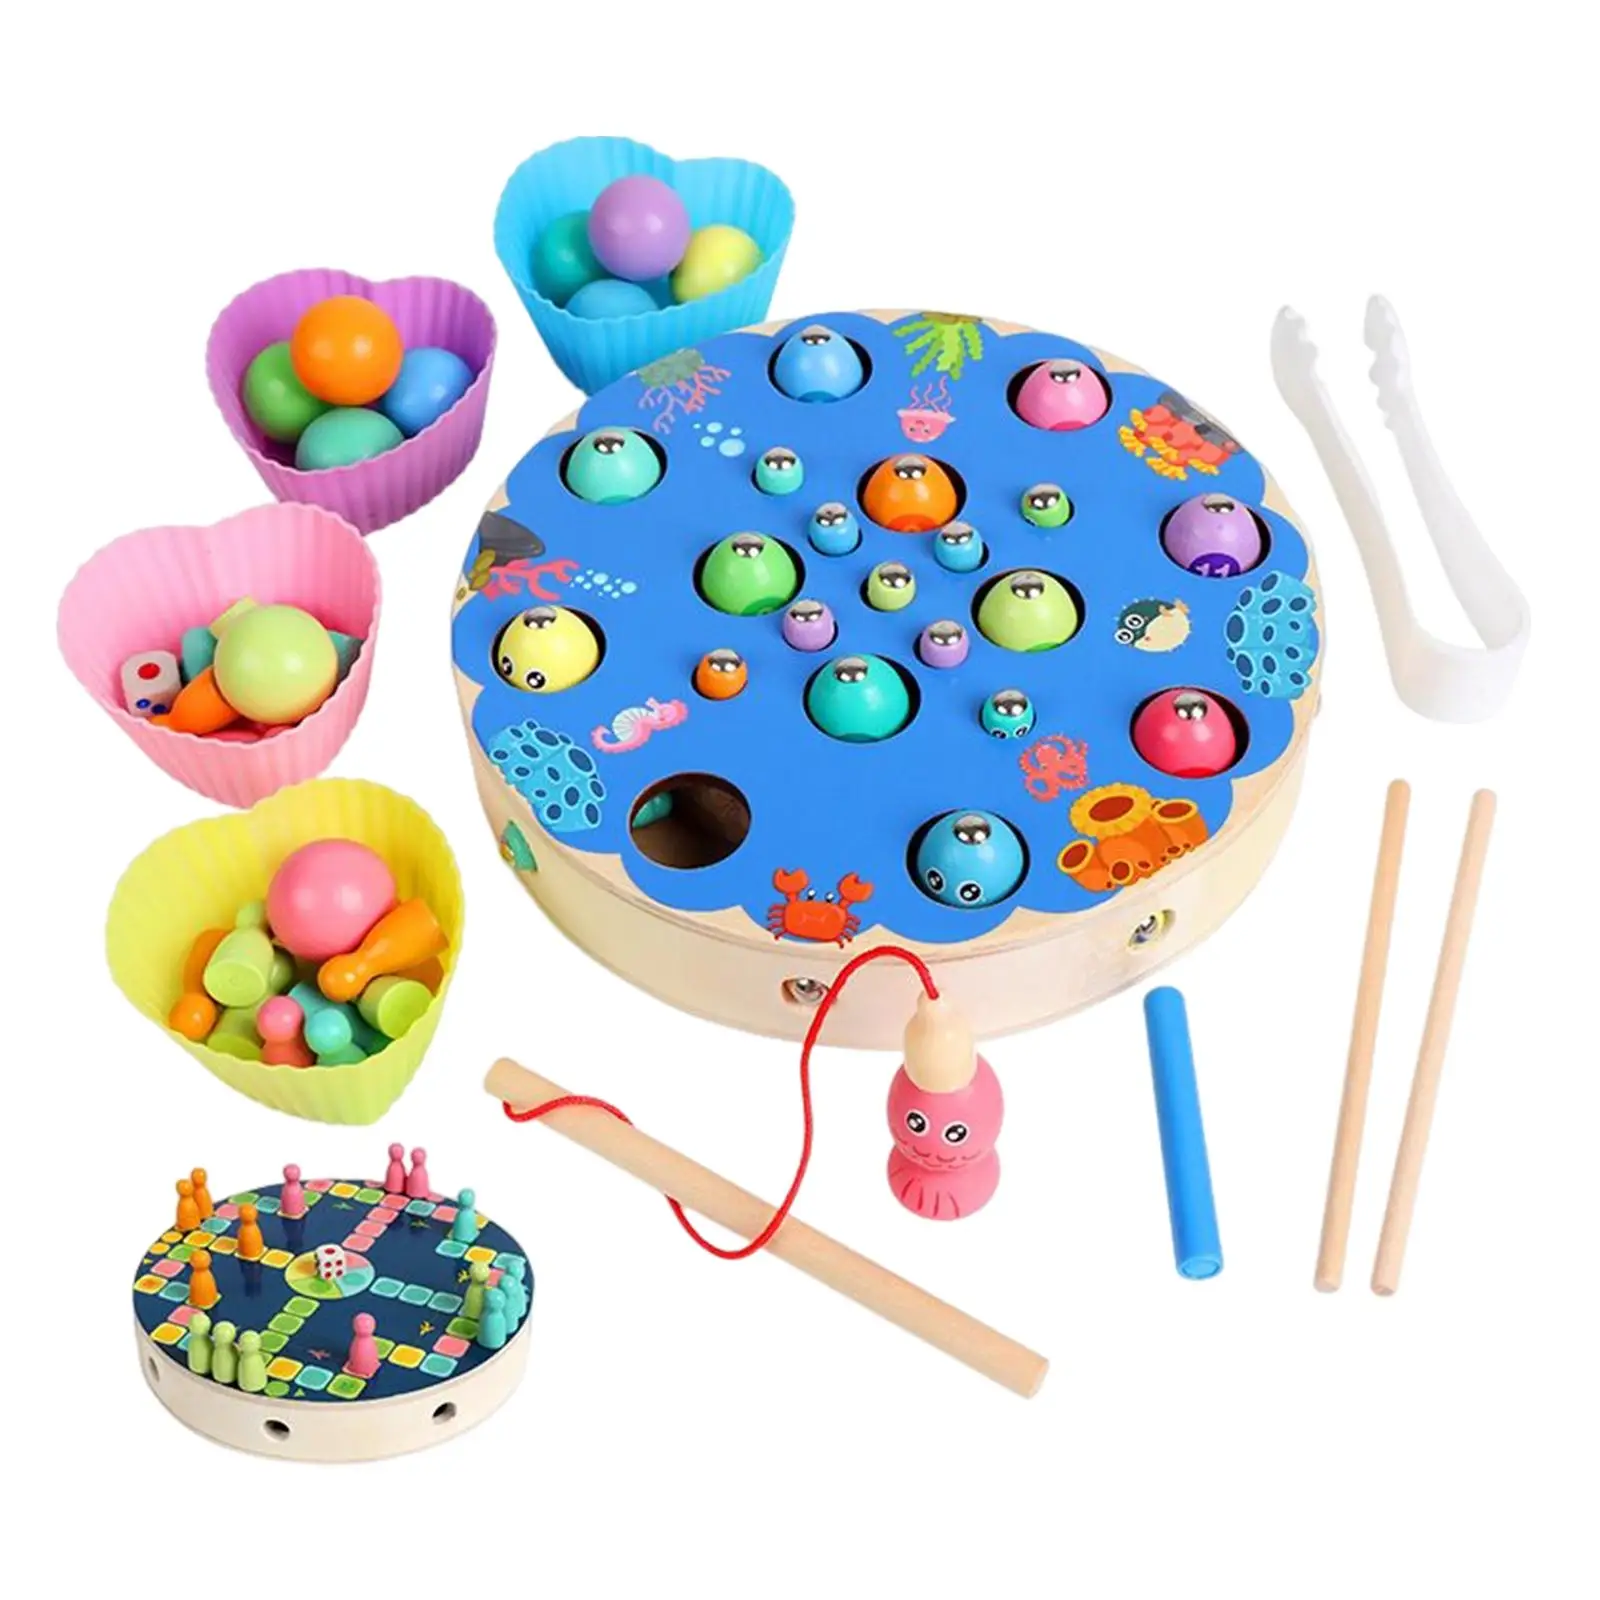 Multicolor Montessori Toys Clamp Color Recognition Educational Chopsticks Wooden Fishing Game for Game Indoor Outdoor Gift